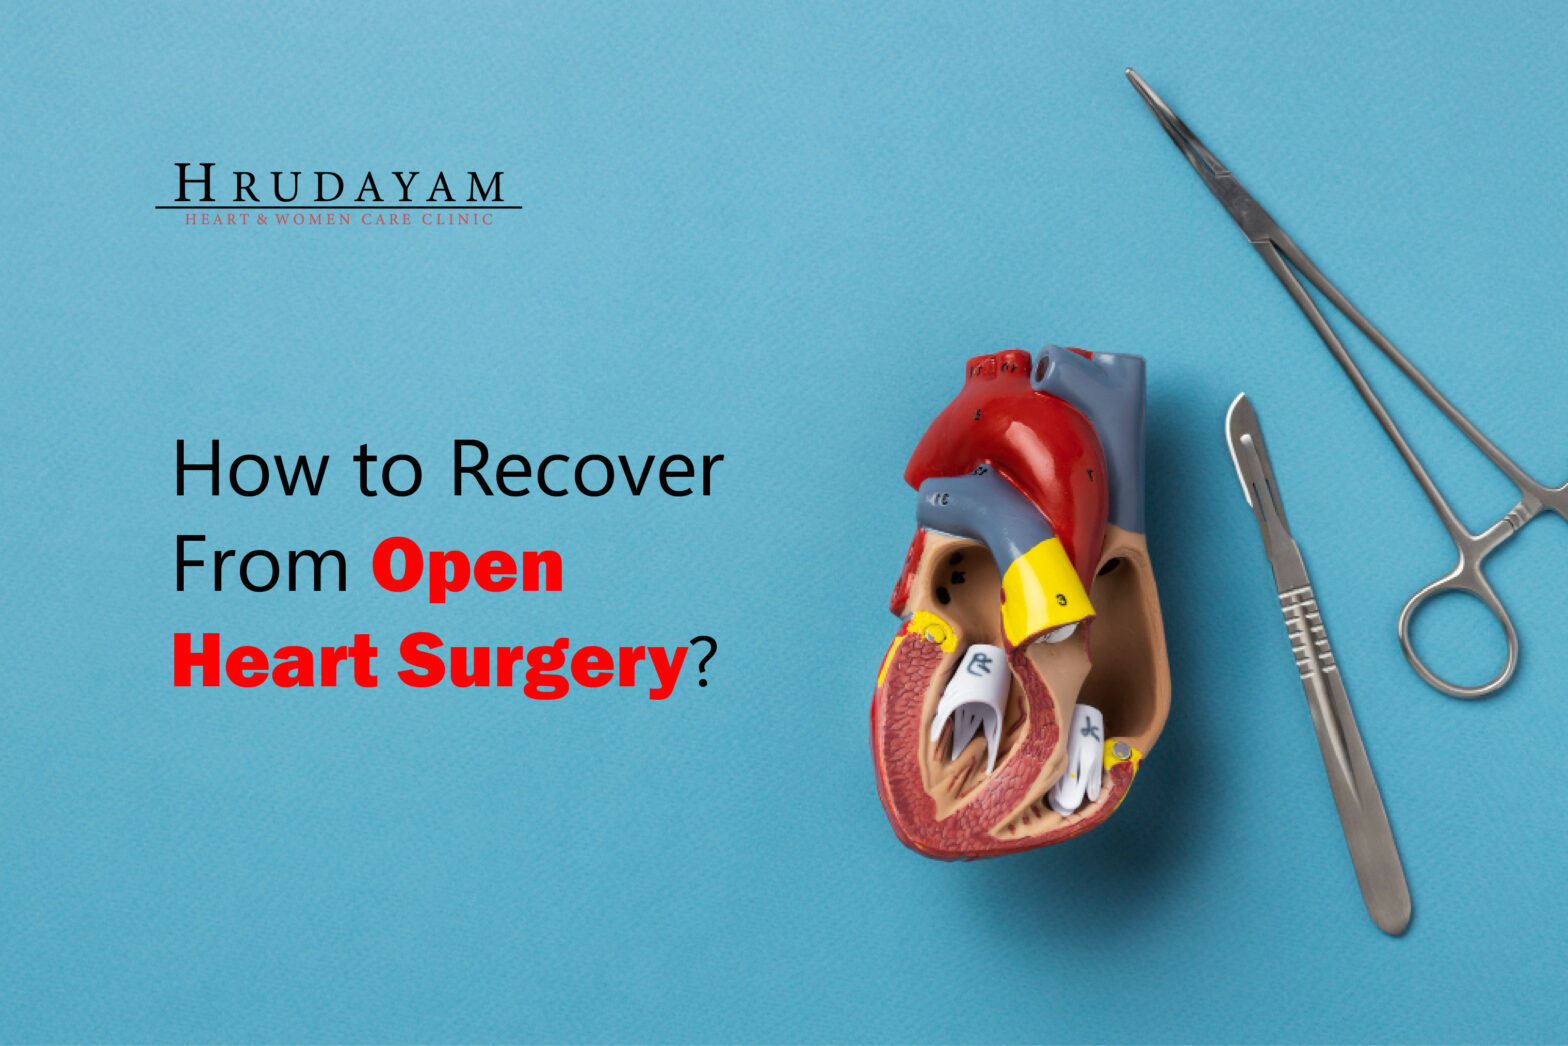 How to Recover From Open Heart Surgery?